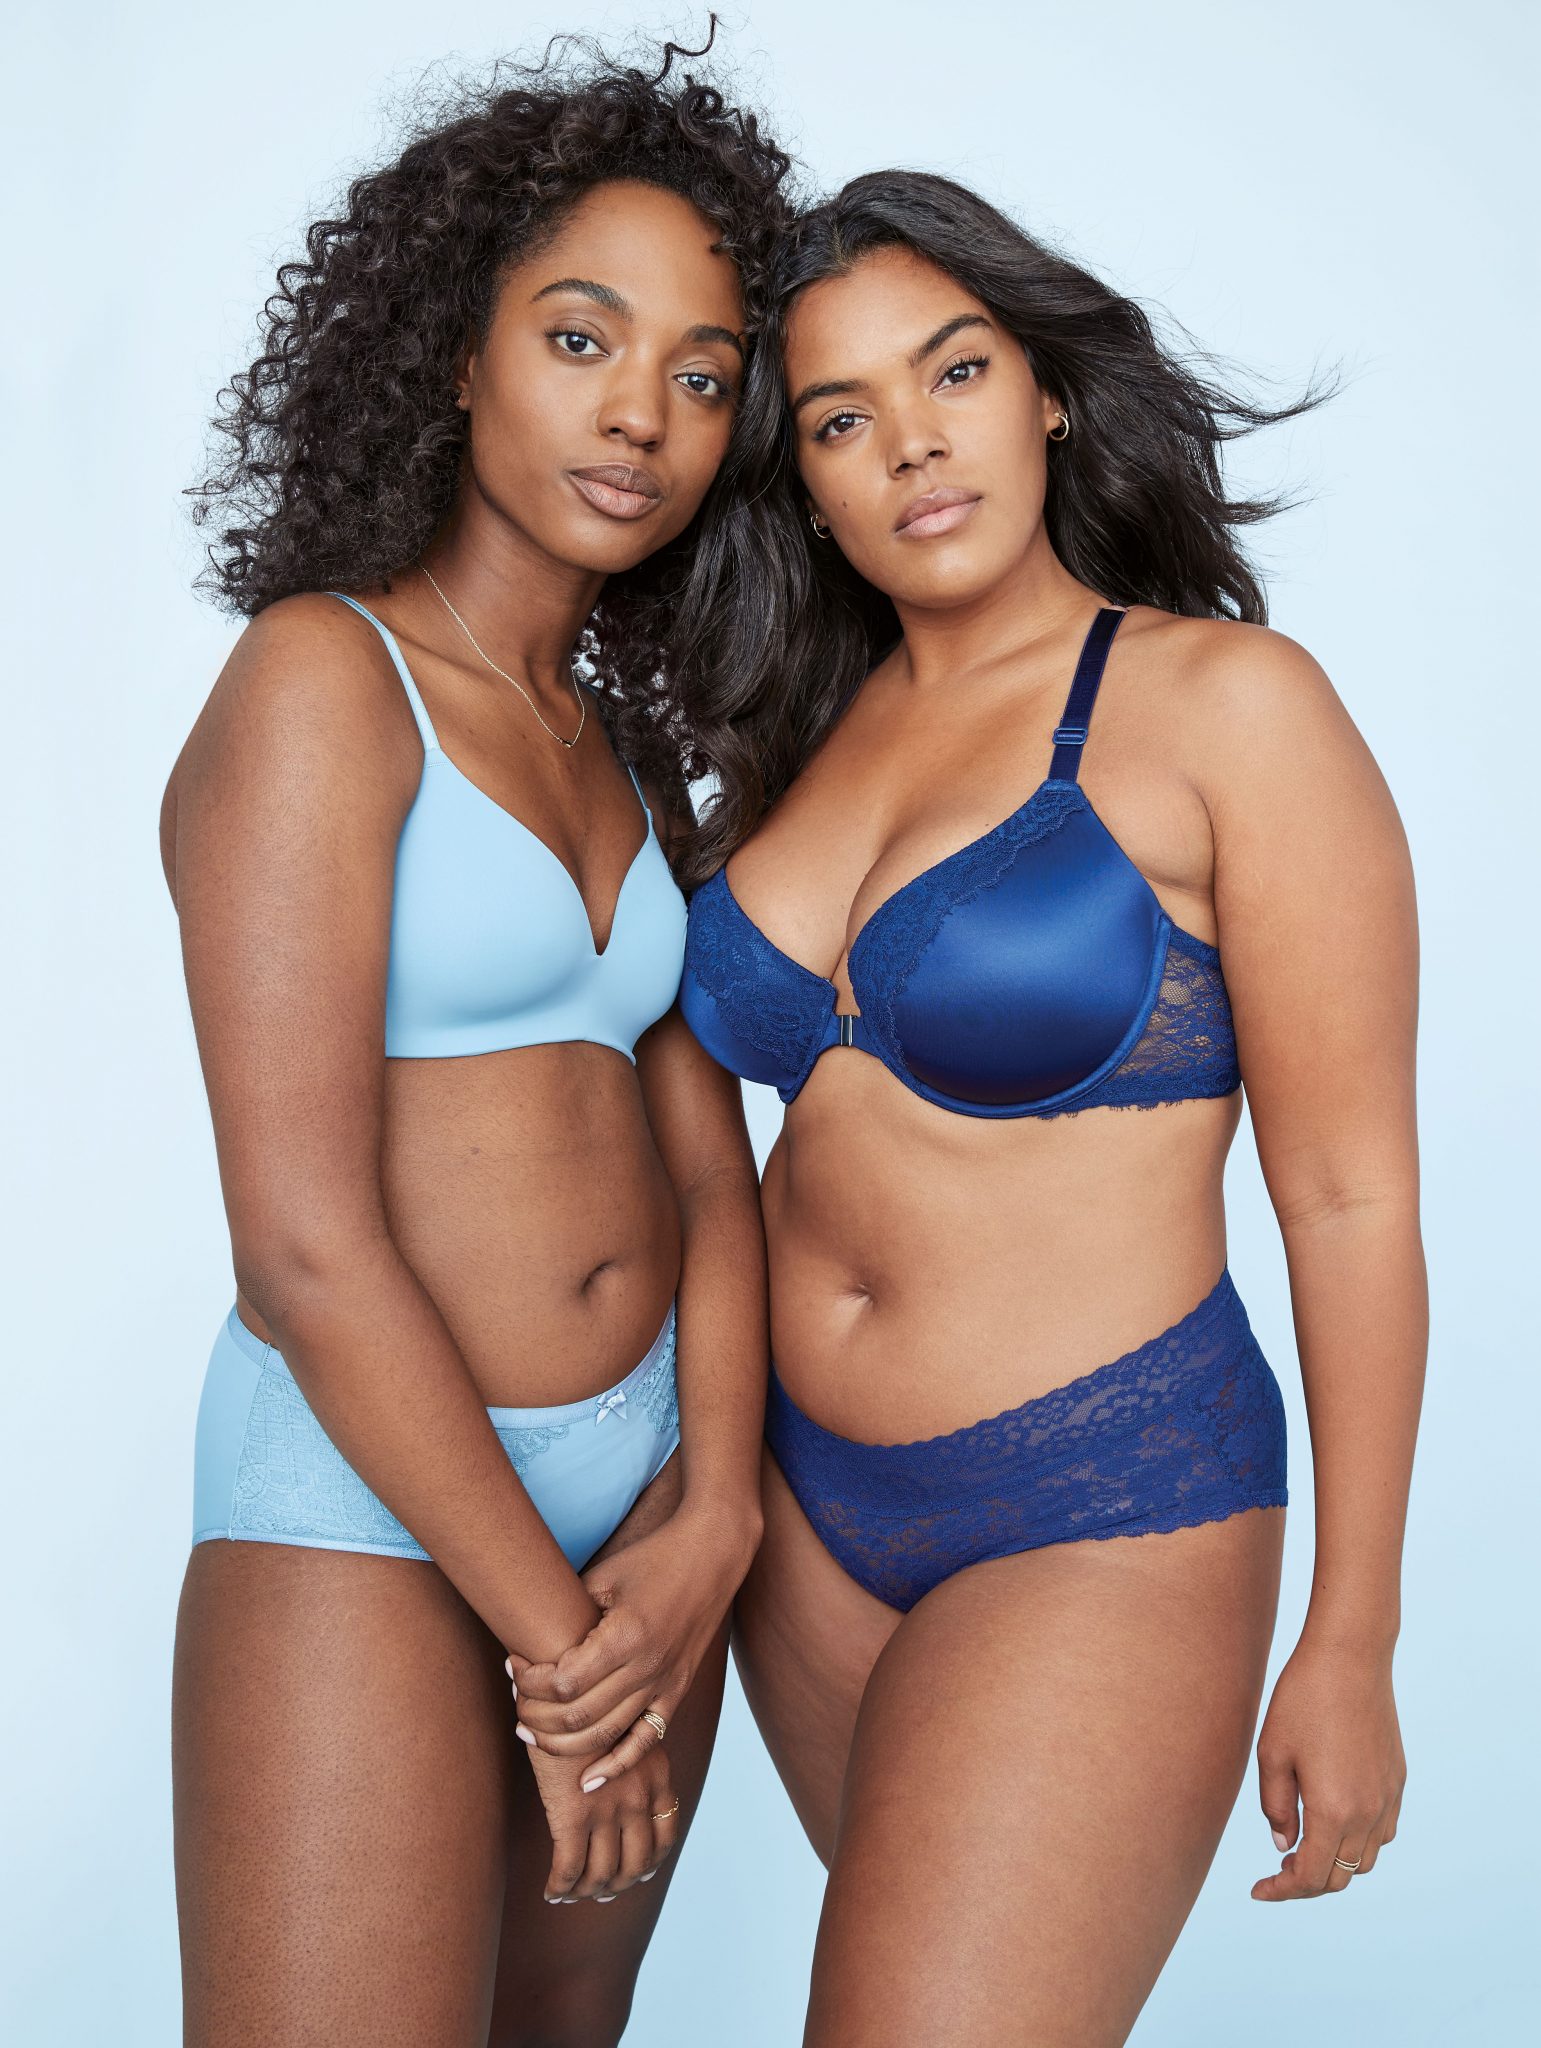 target launches new lingerie & sleepwear brands